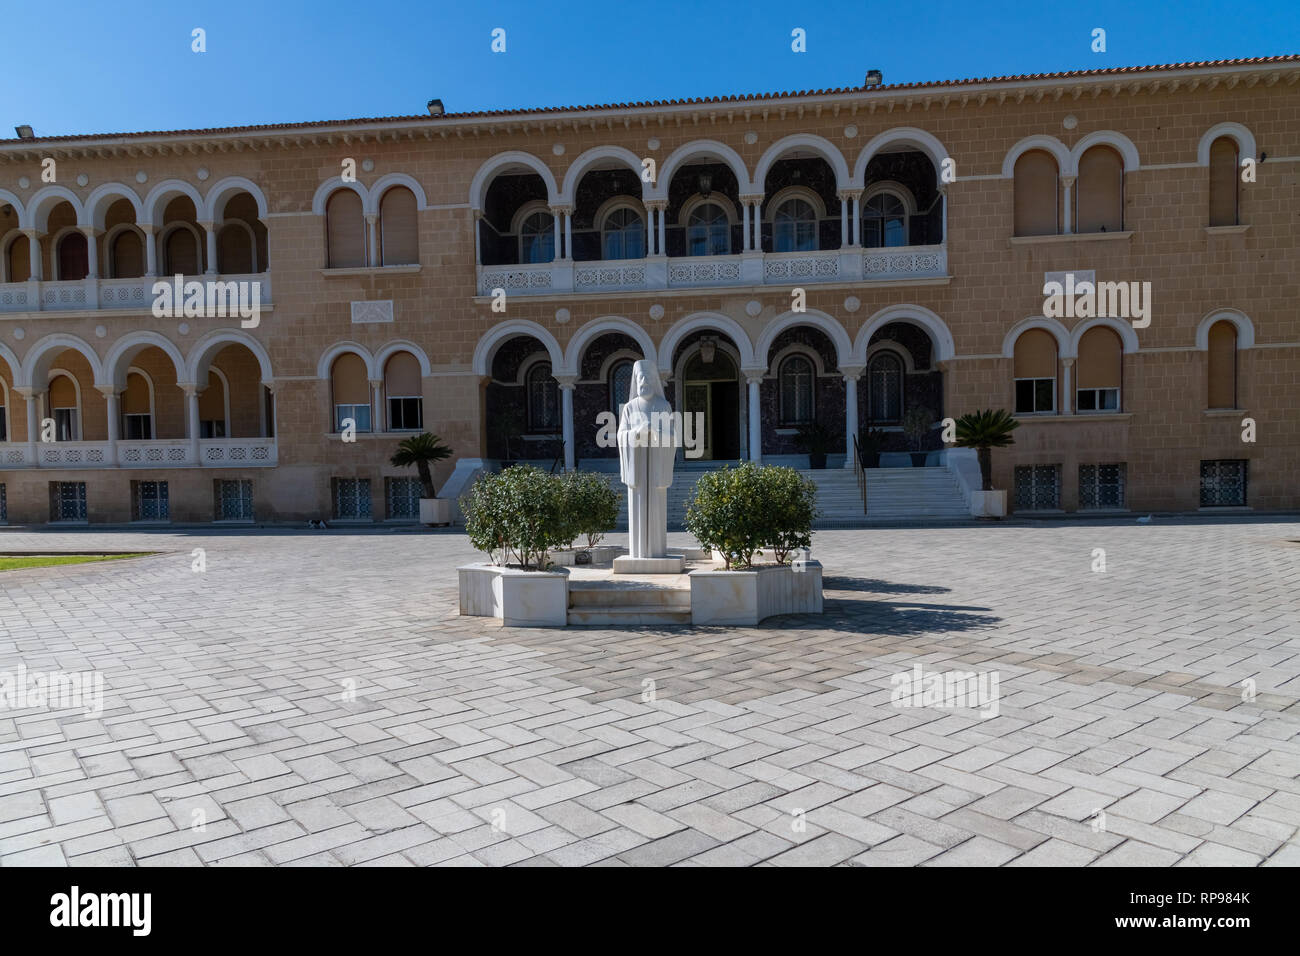 Cyprus, in Greek, Nicosia, Old Town, monument archbishop Makarios and archiepiscopal palace Stock Photo